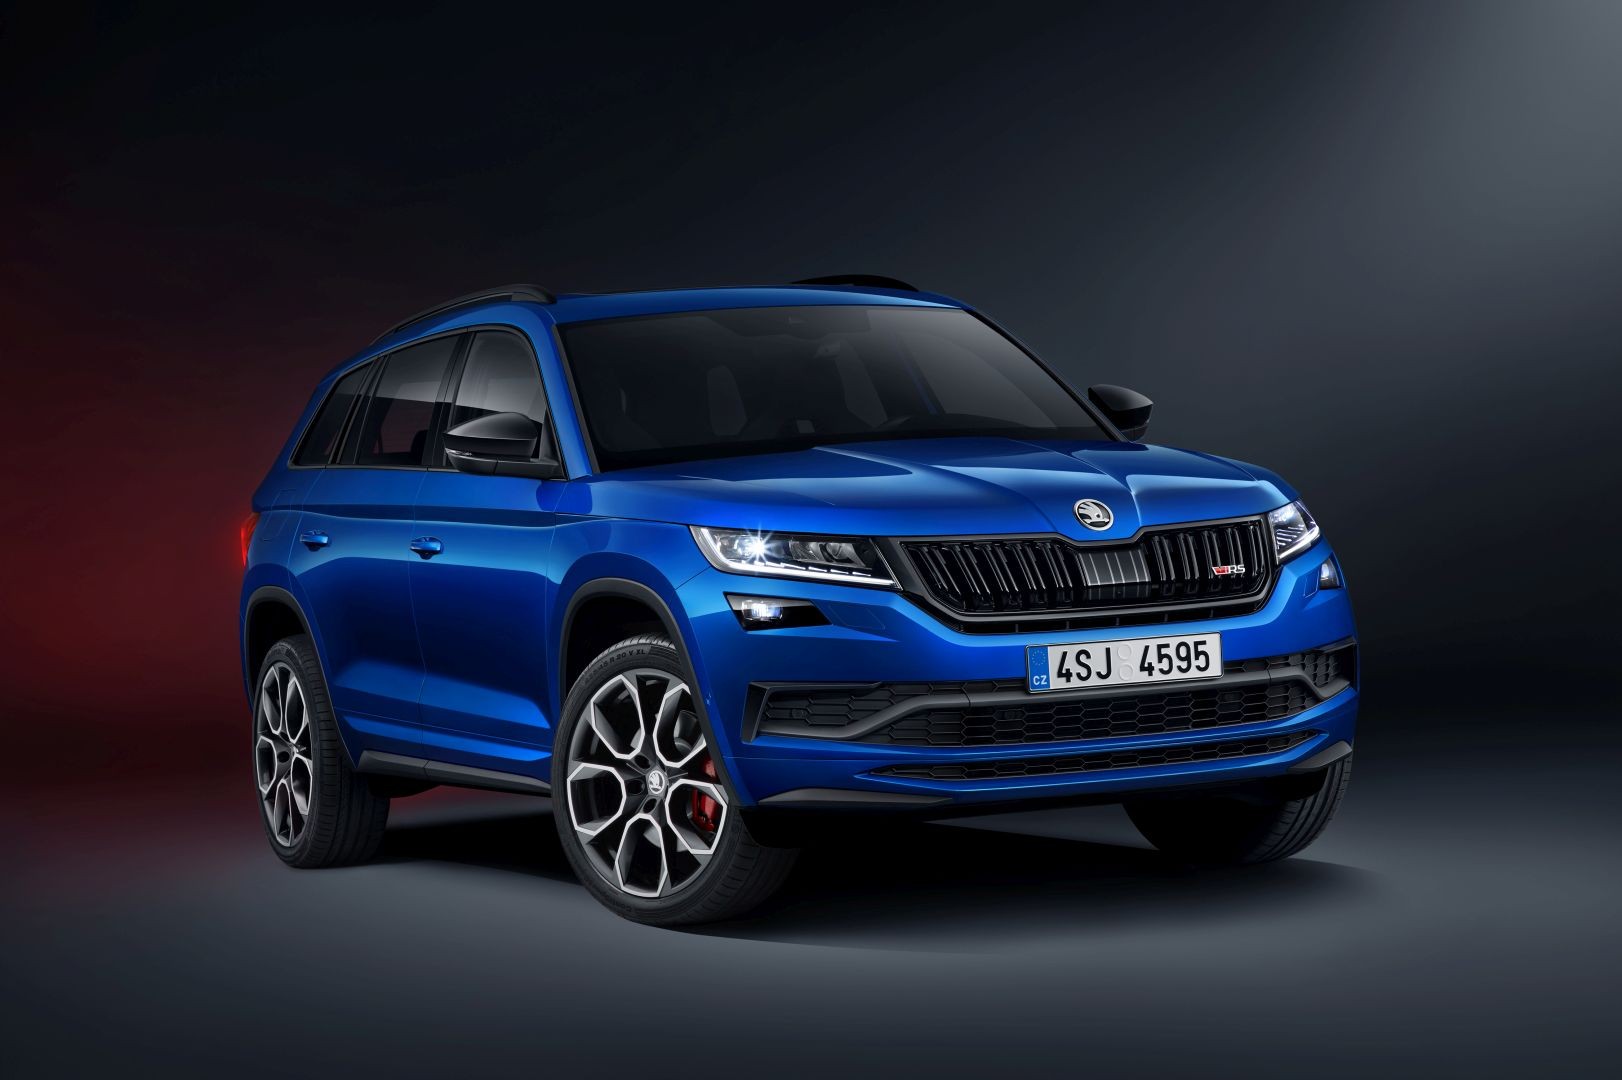 New Skoda Kodiaq RS To Have Nearly 270 Horsepower: Report